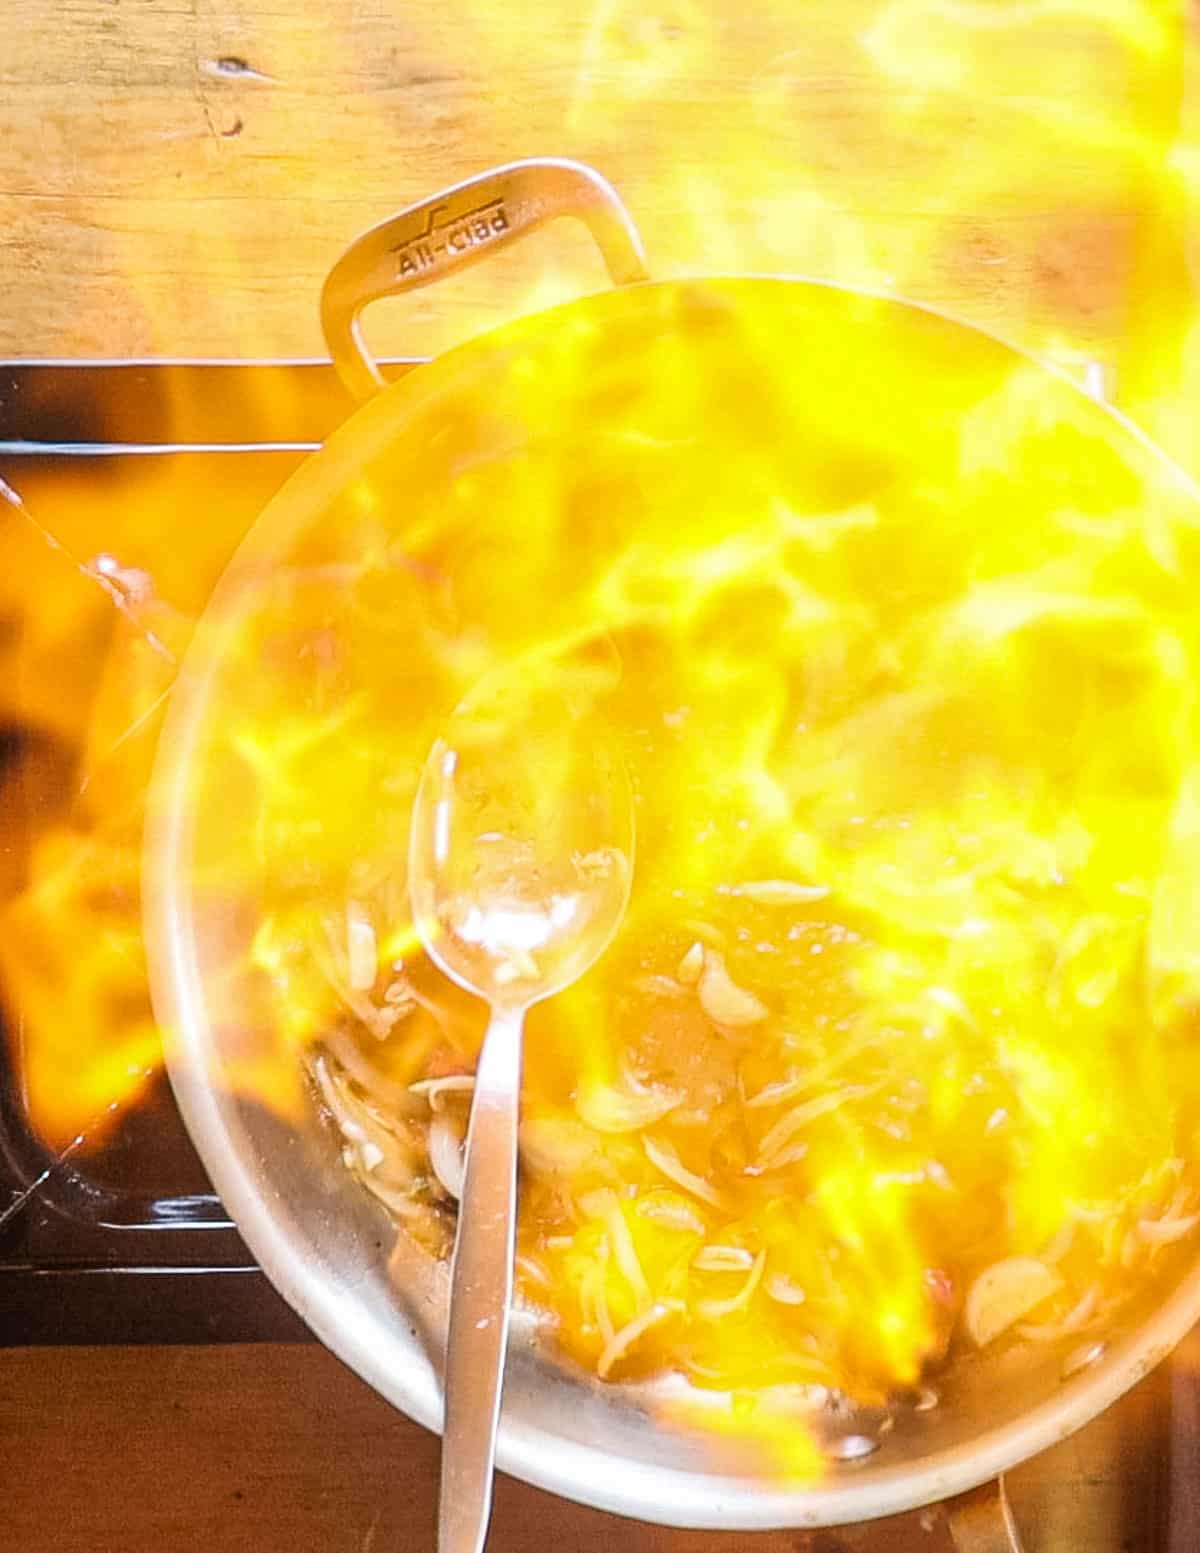 Igniting brandy in a pan. 